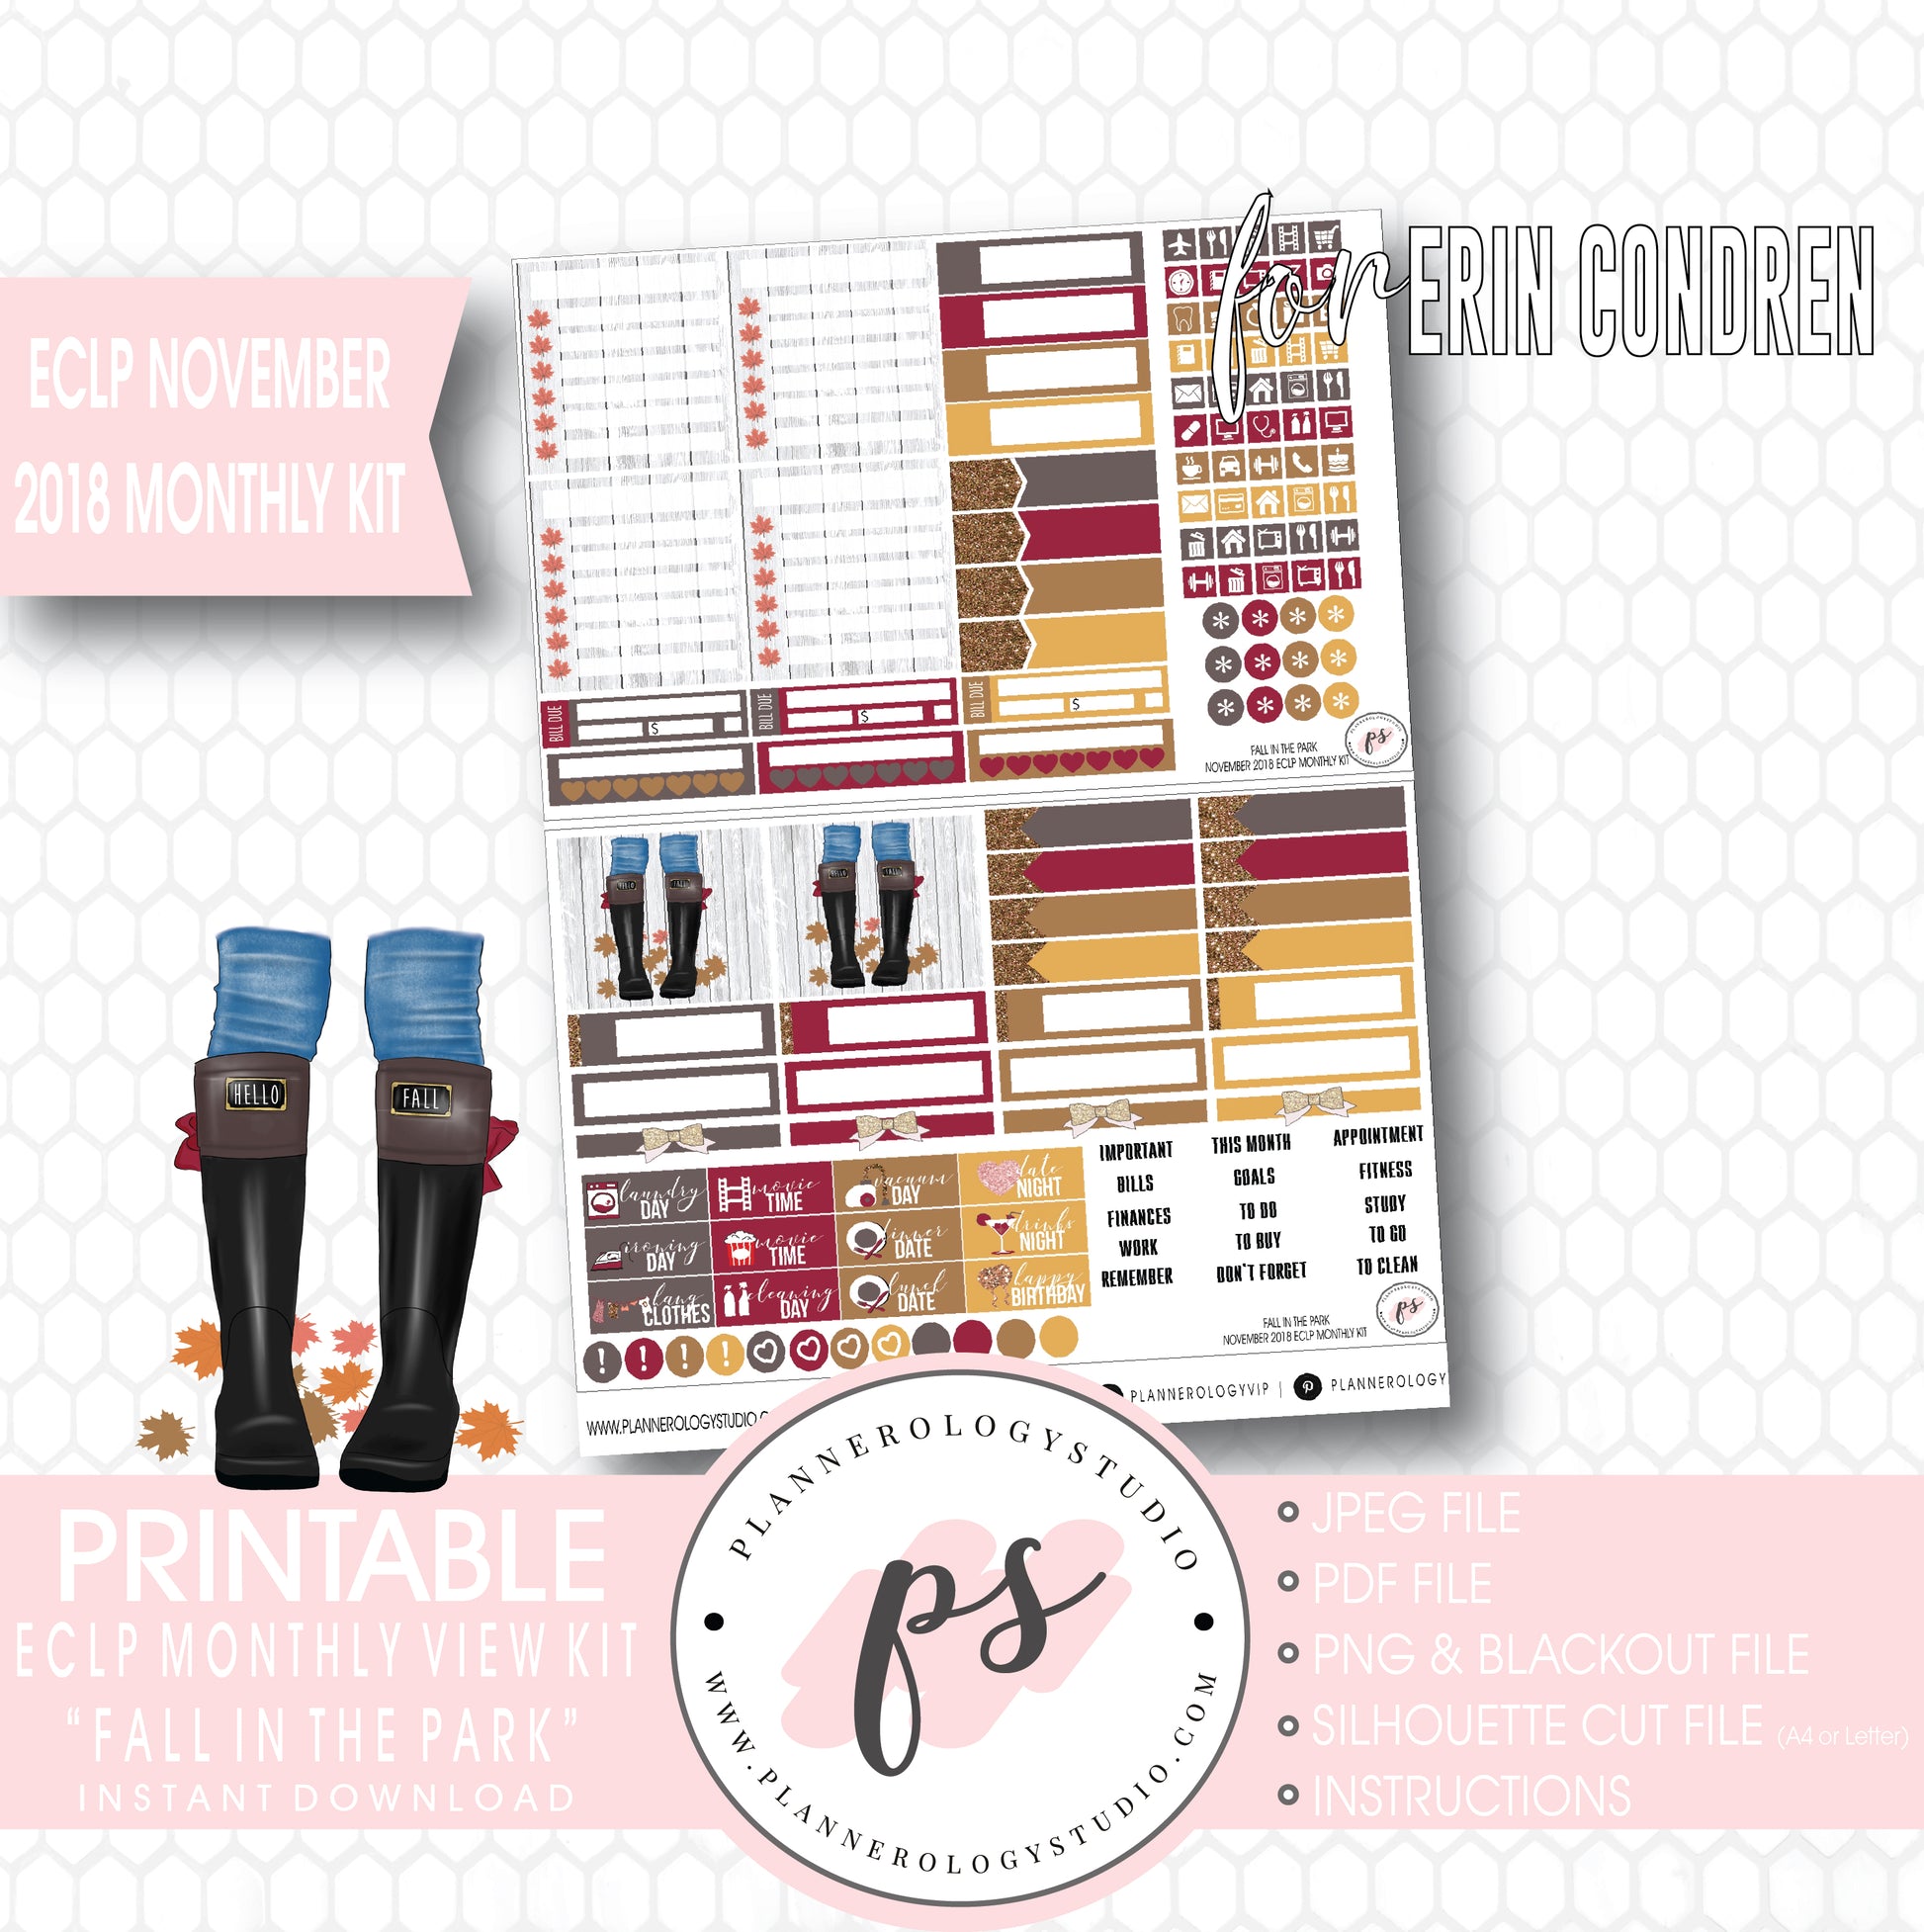 Fall in the Park November 2018 Monthly View Kit Digital Printable Planner Stickers (for use with Erin Condren) - Plannerologystudio